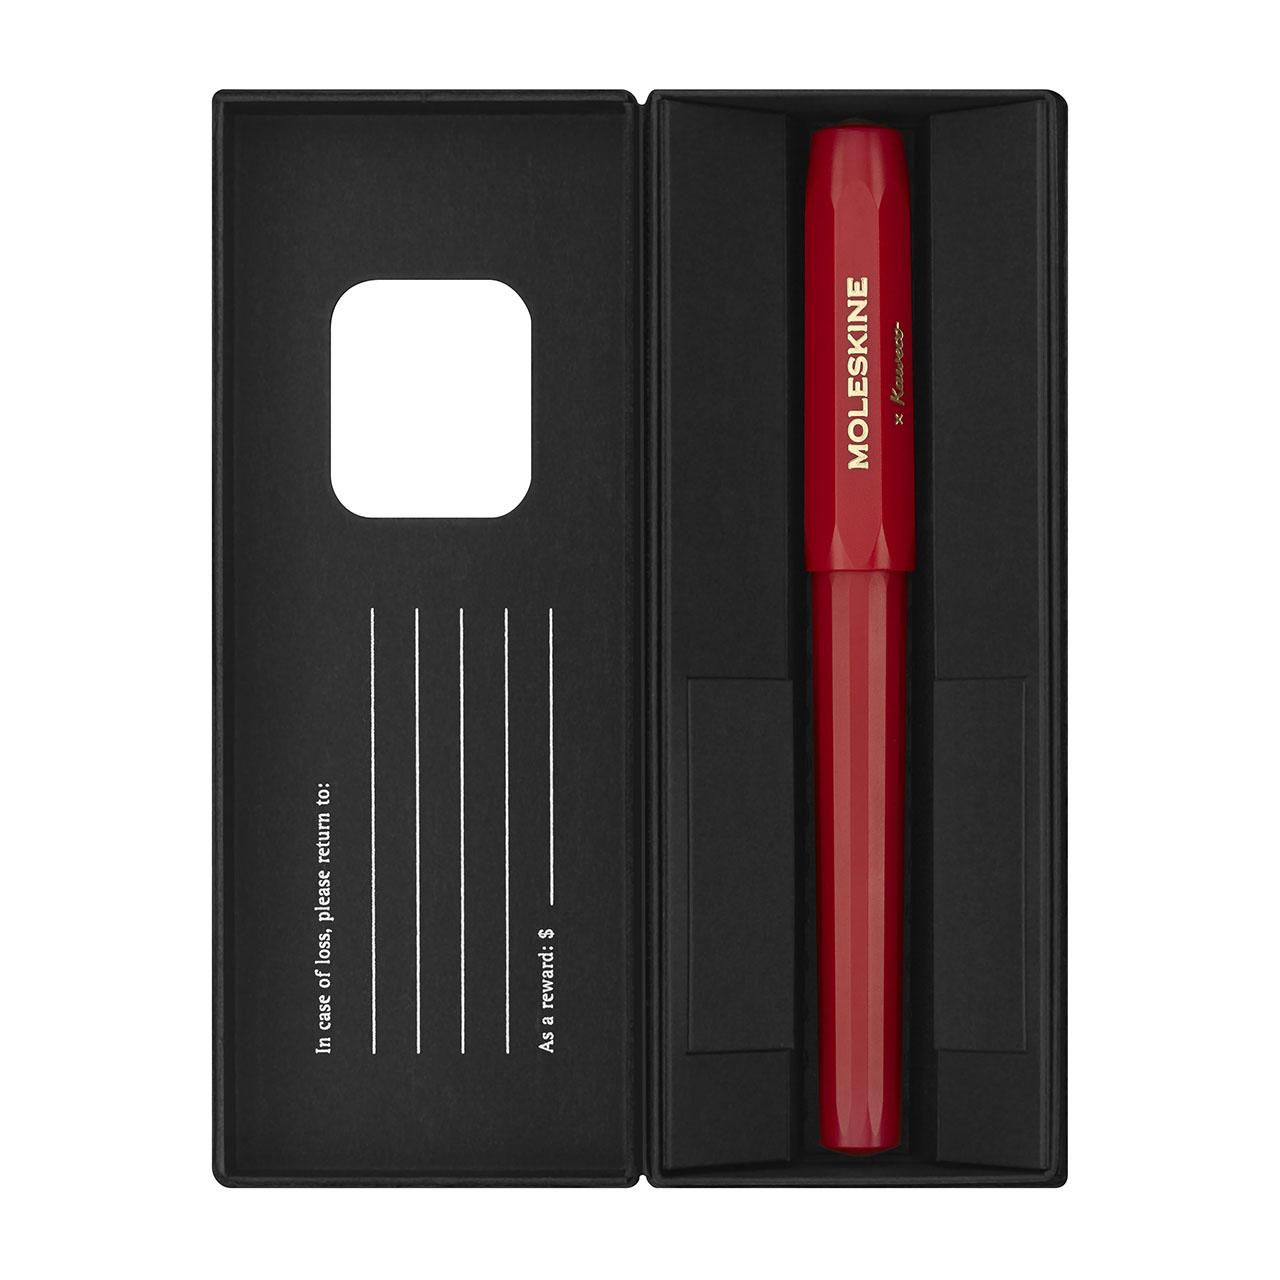 Kaweco Collection Rollerball Pen Red